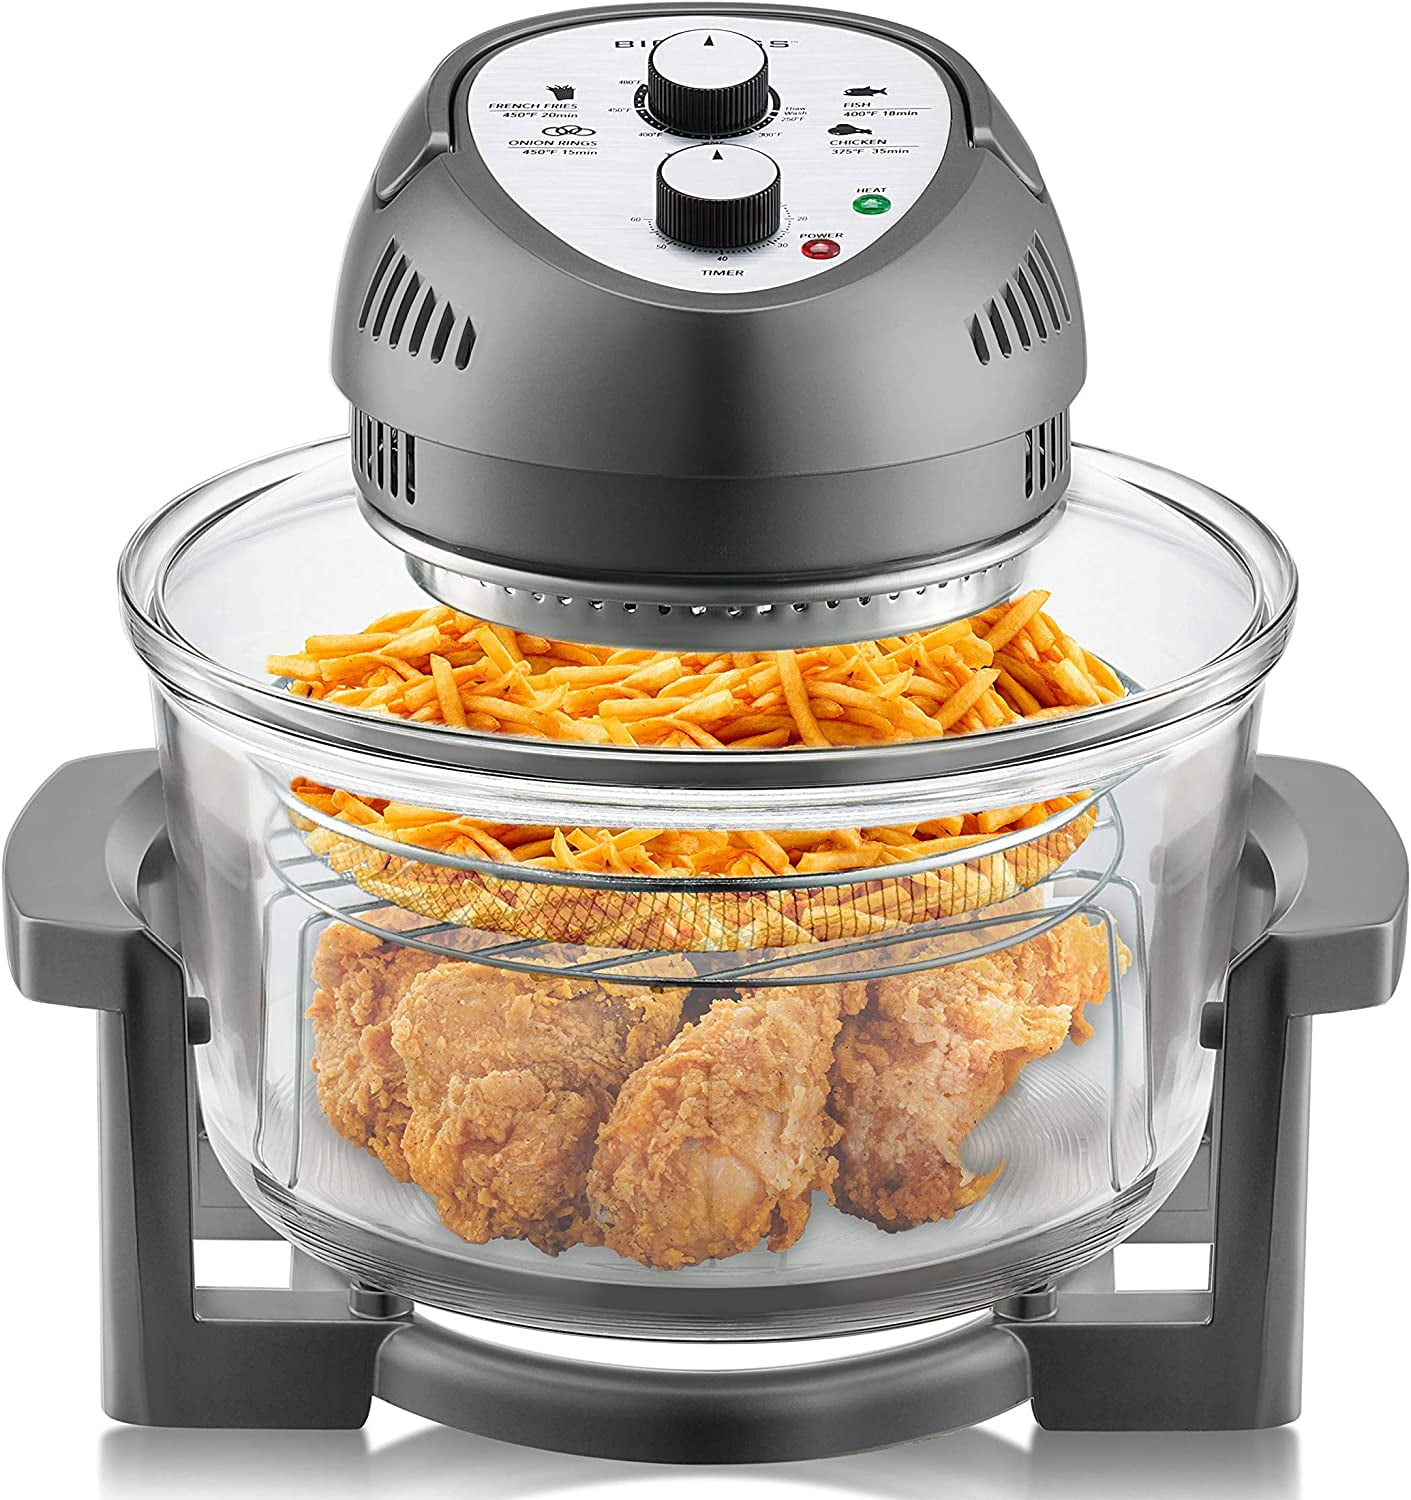 Big Boss Oil-less Air Fryer, 16 Quart, 1300W, Easy Operation with 